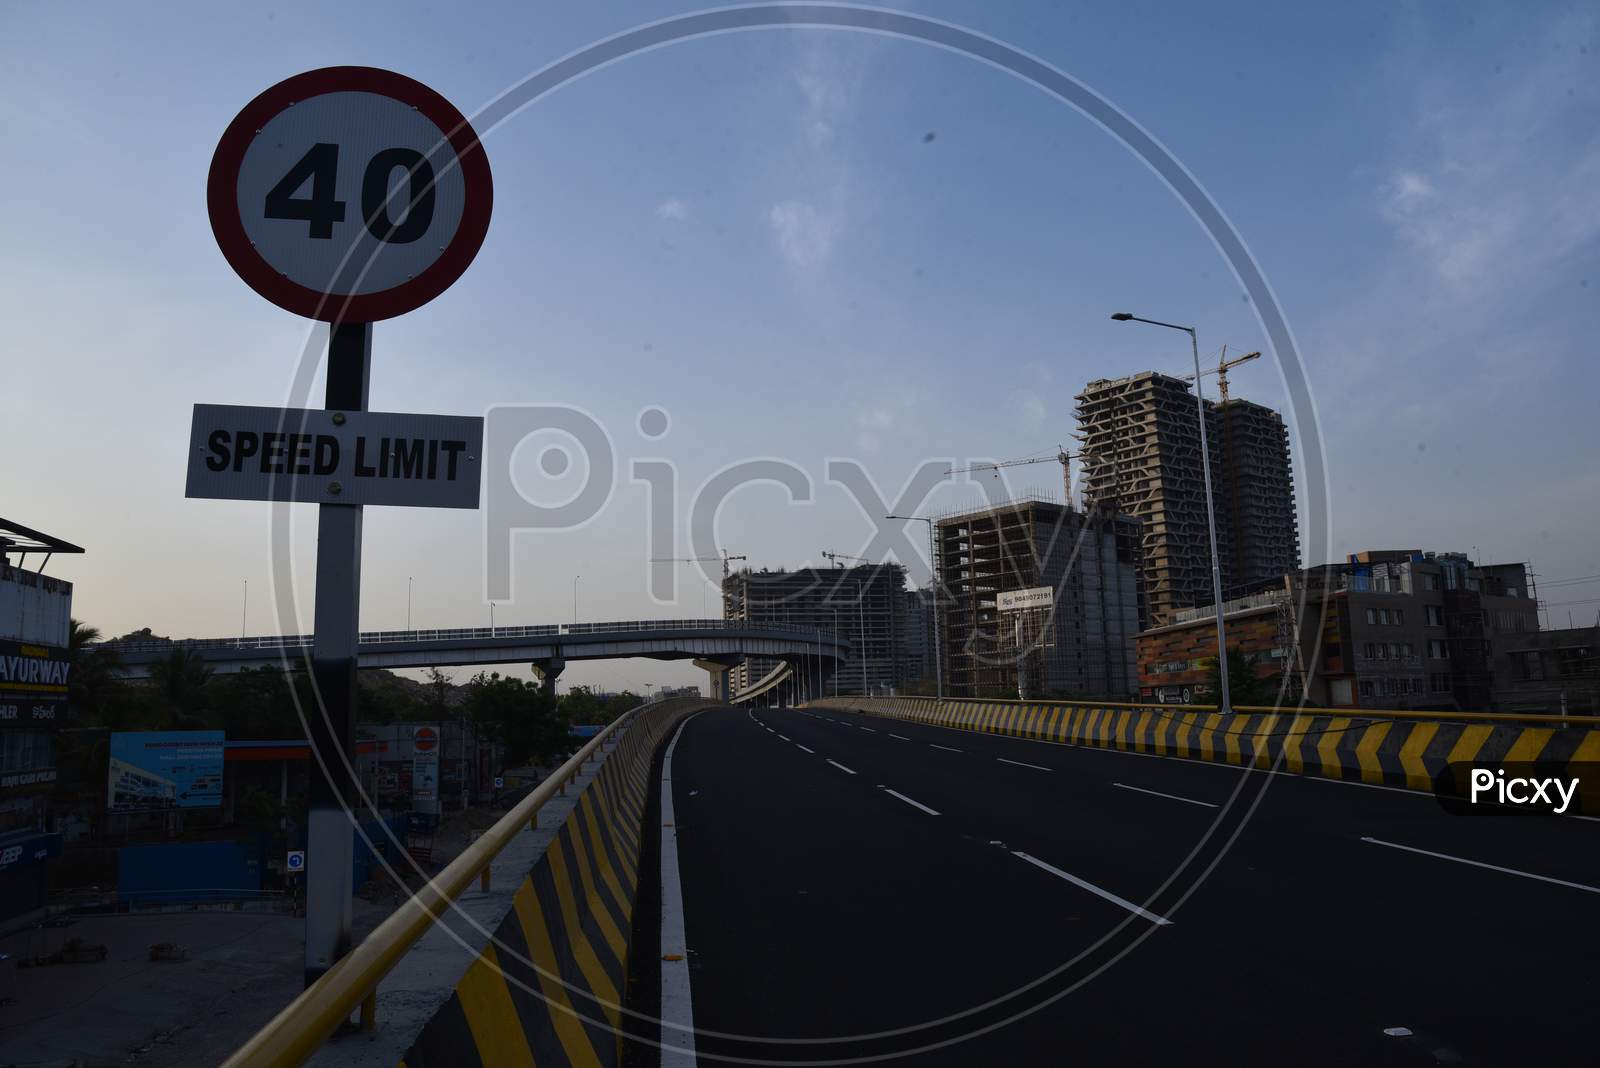 Speed limit 40 kmph on the Bio Diversity Flyover Level 1